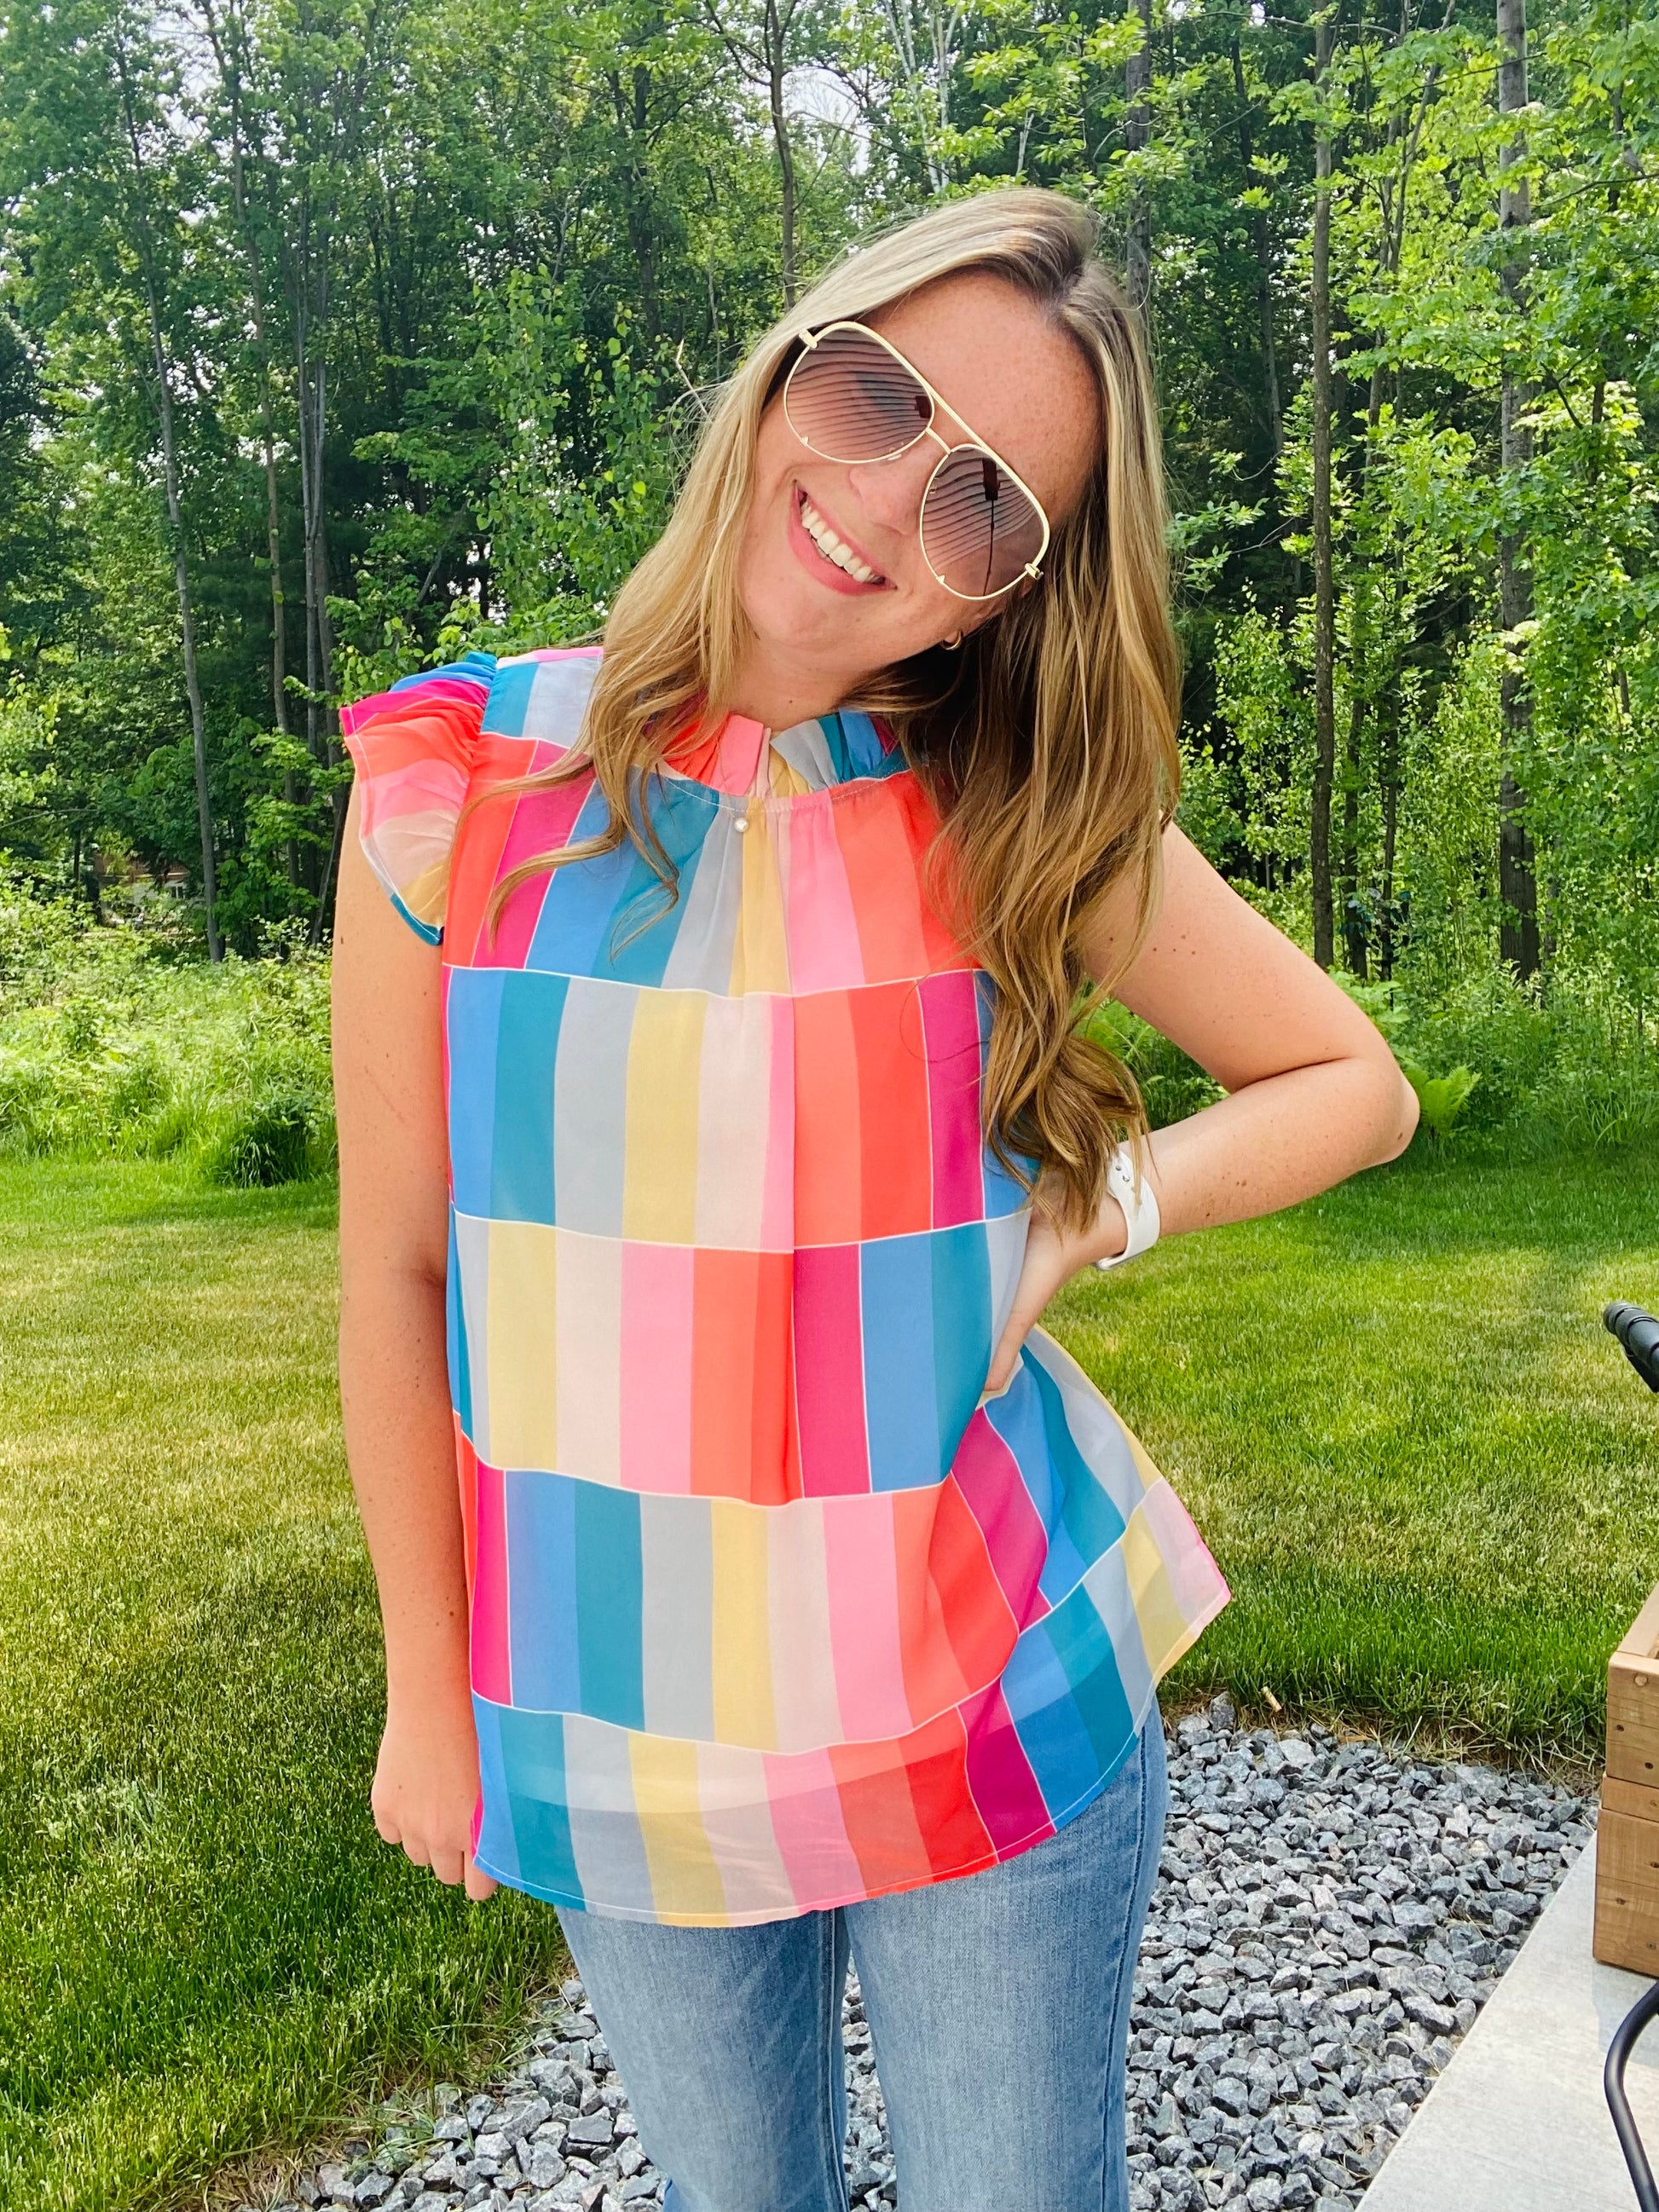 This Color Wheel Ruffle Blouse is the perfect office essential for the summer season. Crafted with bright, vibrant colors, the trendy high neckline and key hole closure provide an updated classic silhouette. The perfect match for any summer ensemble.